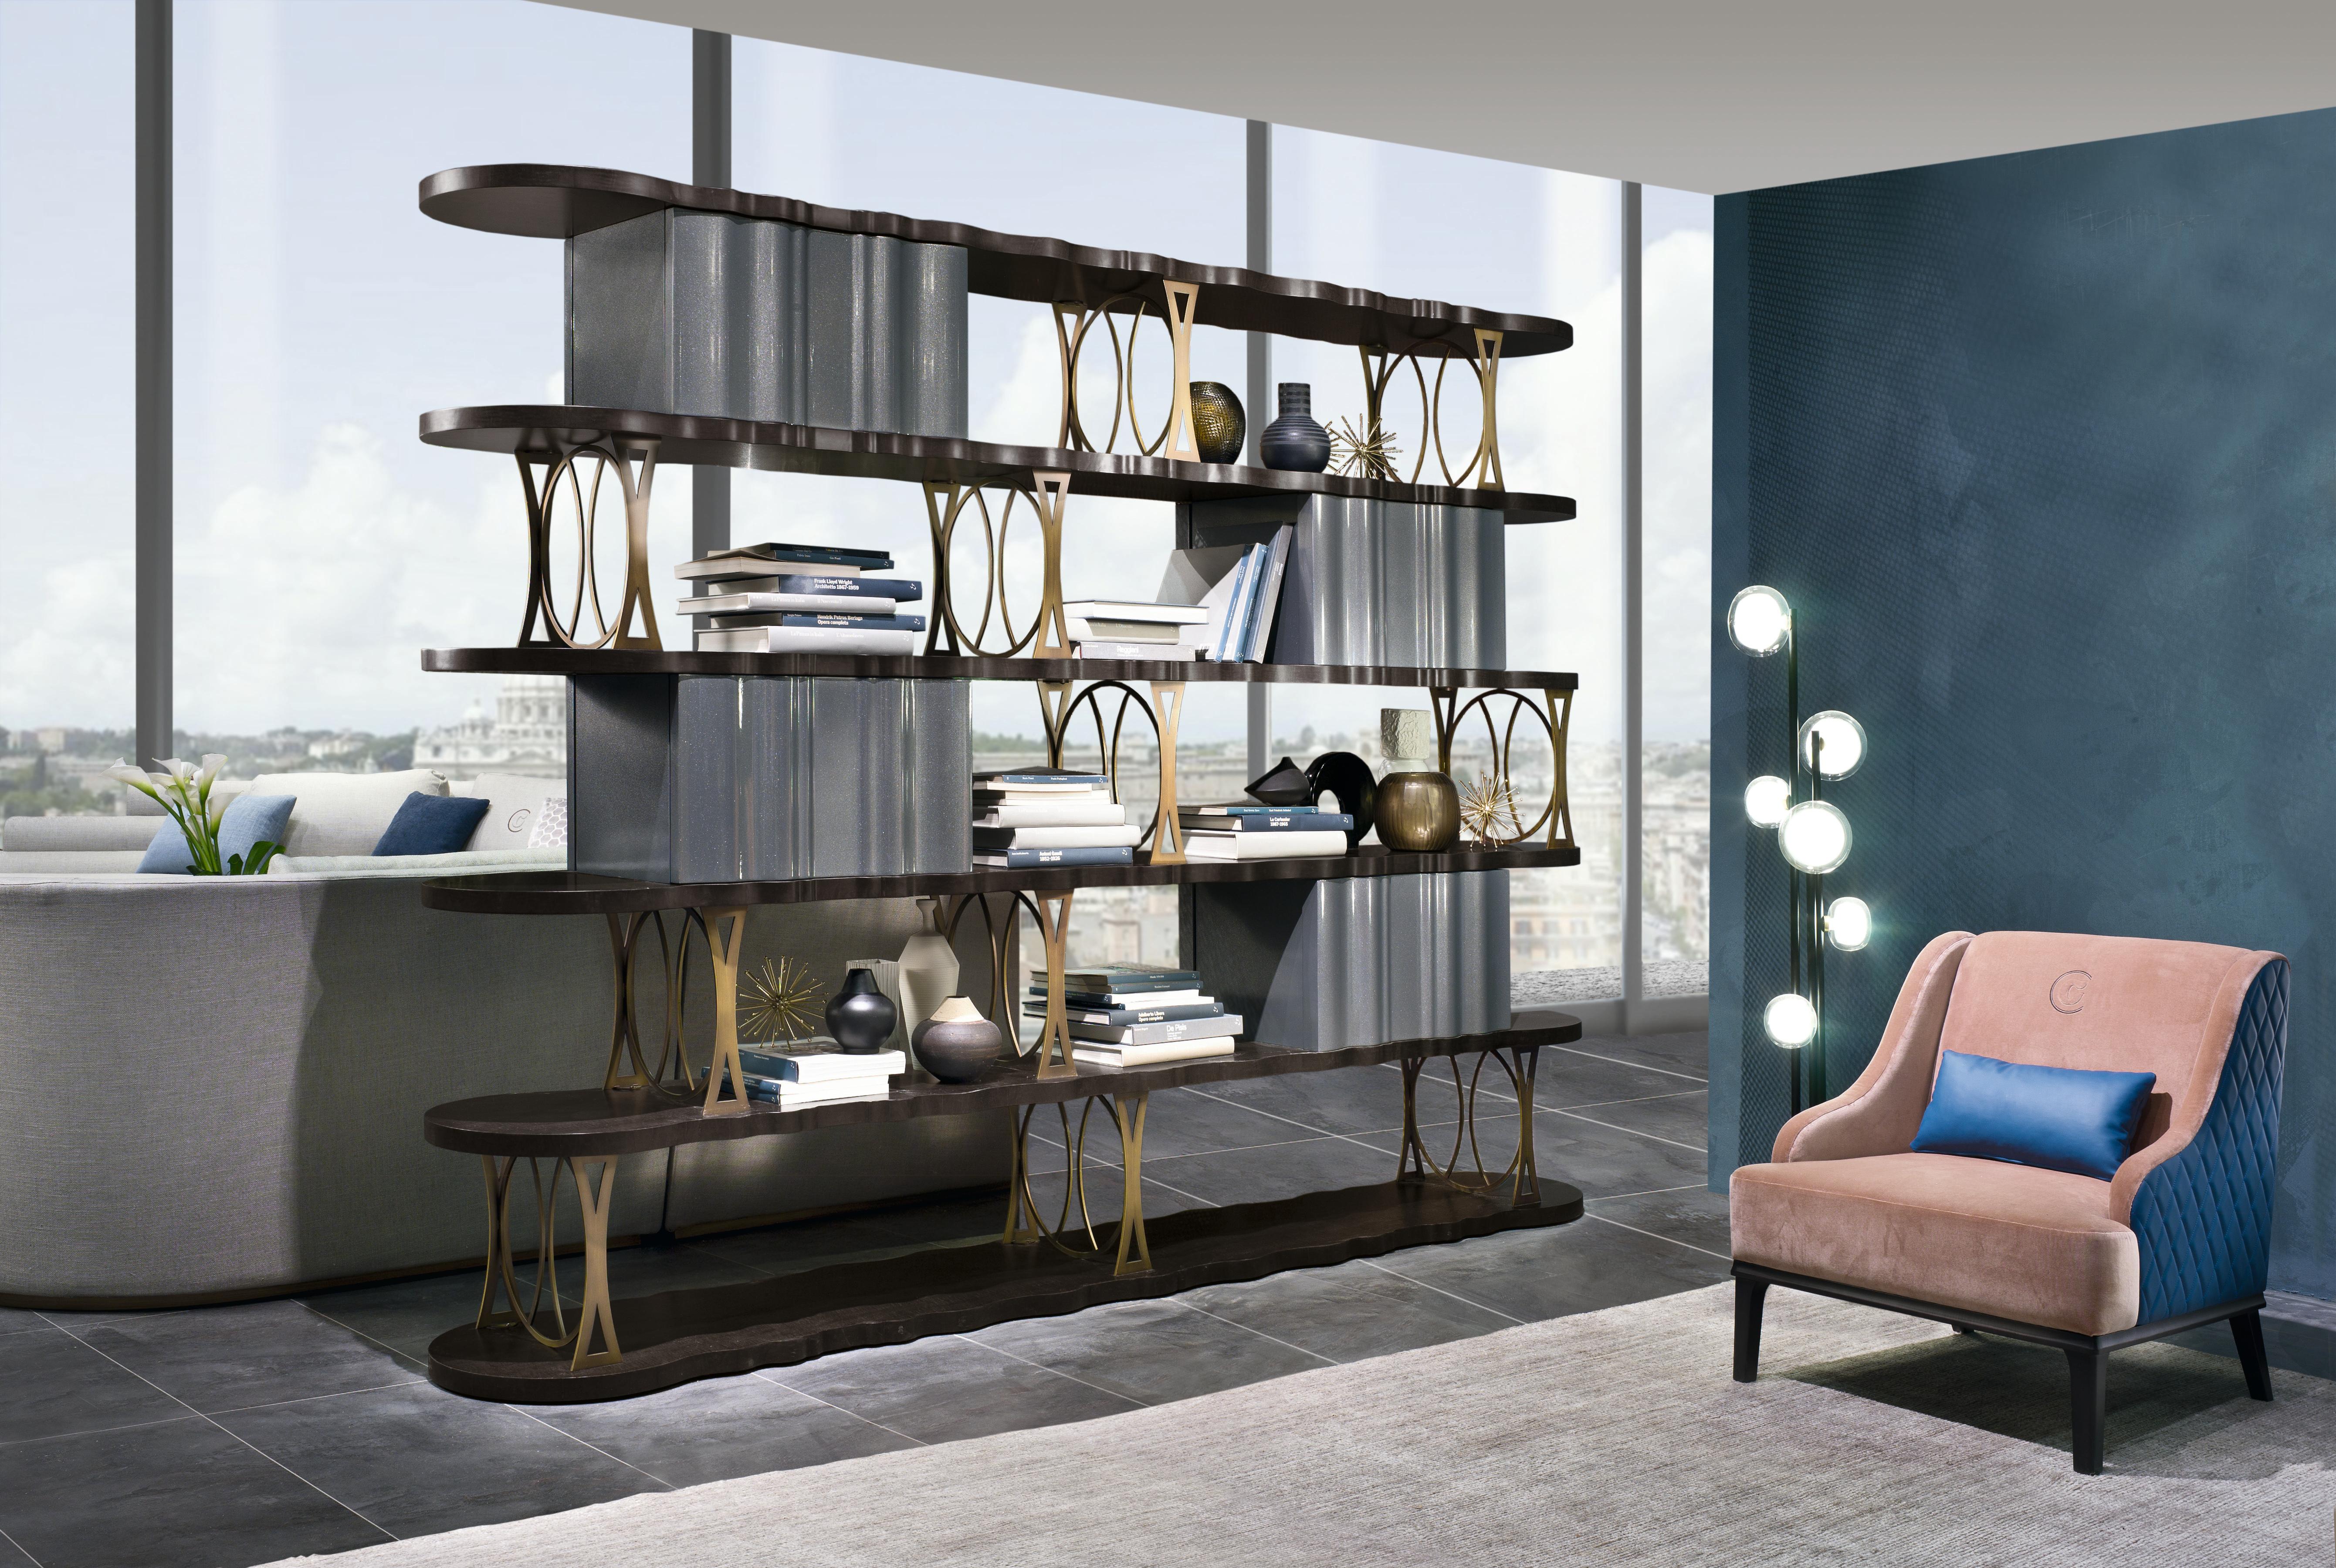 Bookcase composition with bifacial shelves. The shelves are in Sycomoro dark frisè wood.
The original metal part is the supporting element for the realization of the bookcase and it is in satin bronzed finish.
The bookcase is equipped with